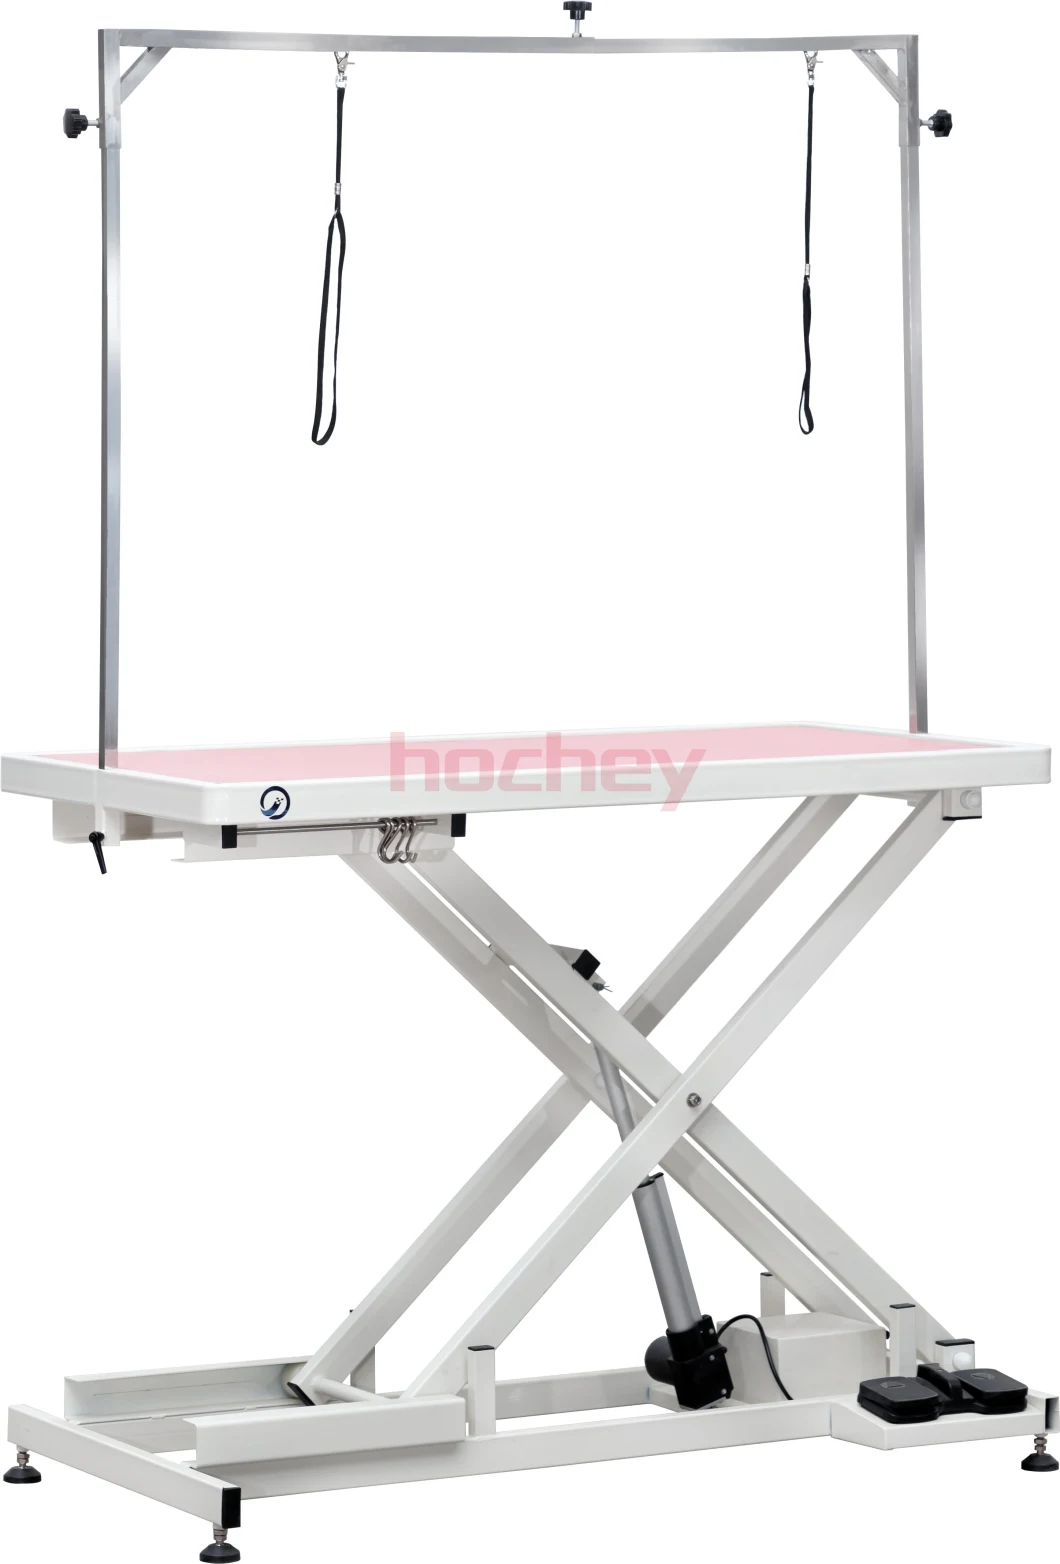 Pet Dog Electric Grooming Table LED Lifting Grooming Table Portable Folding Pet Grooming Table